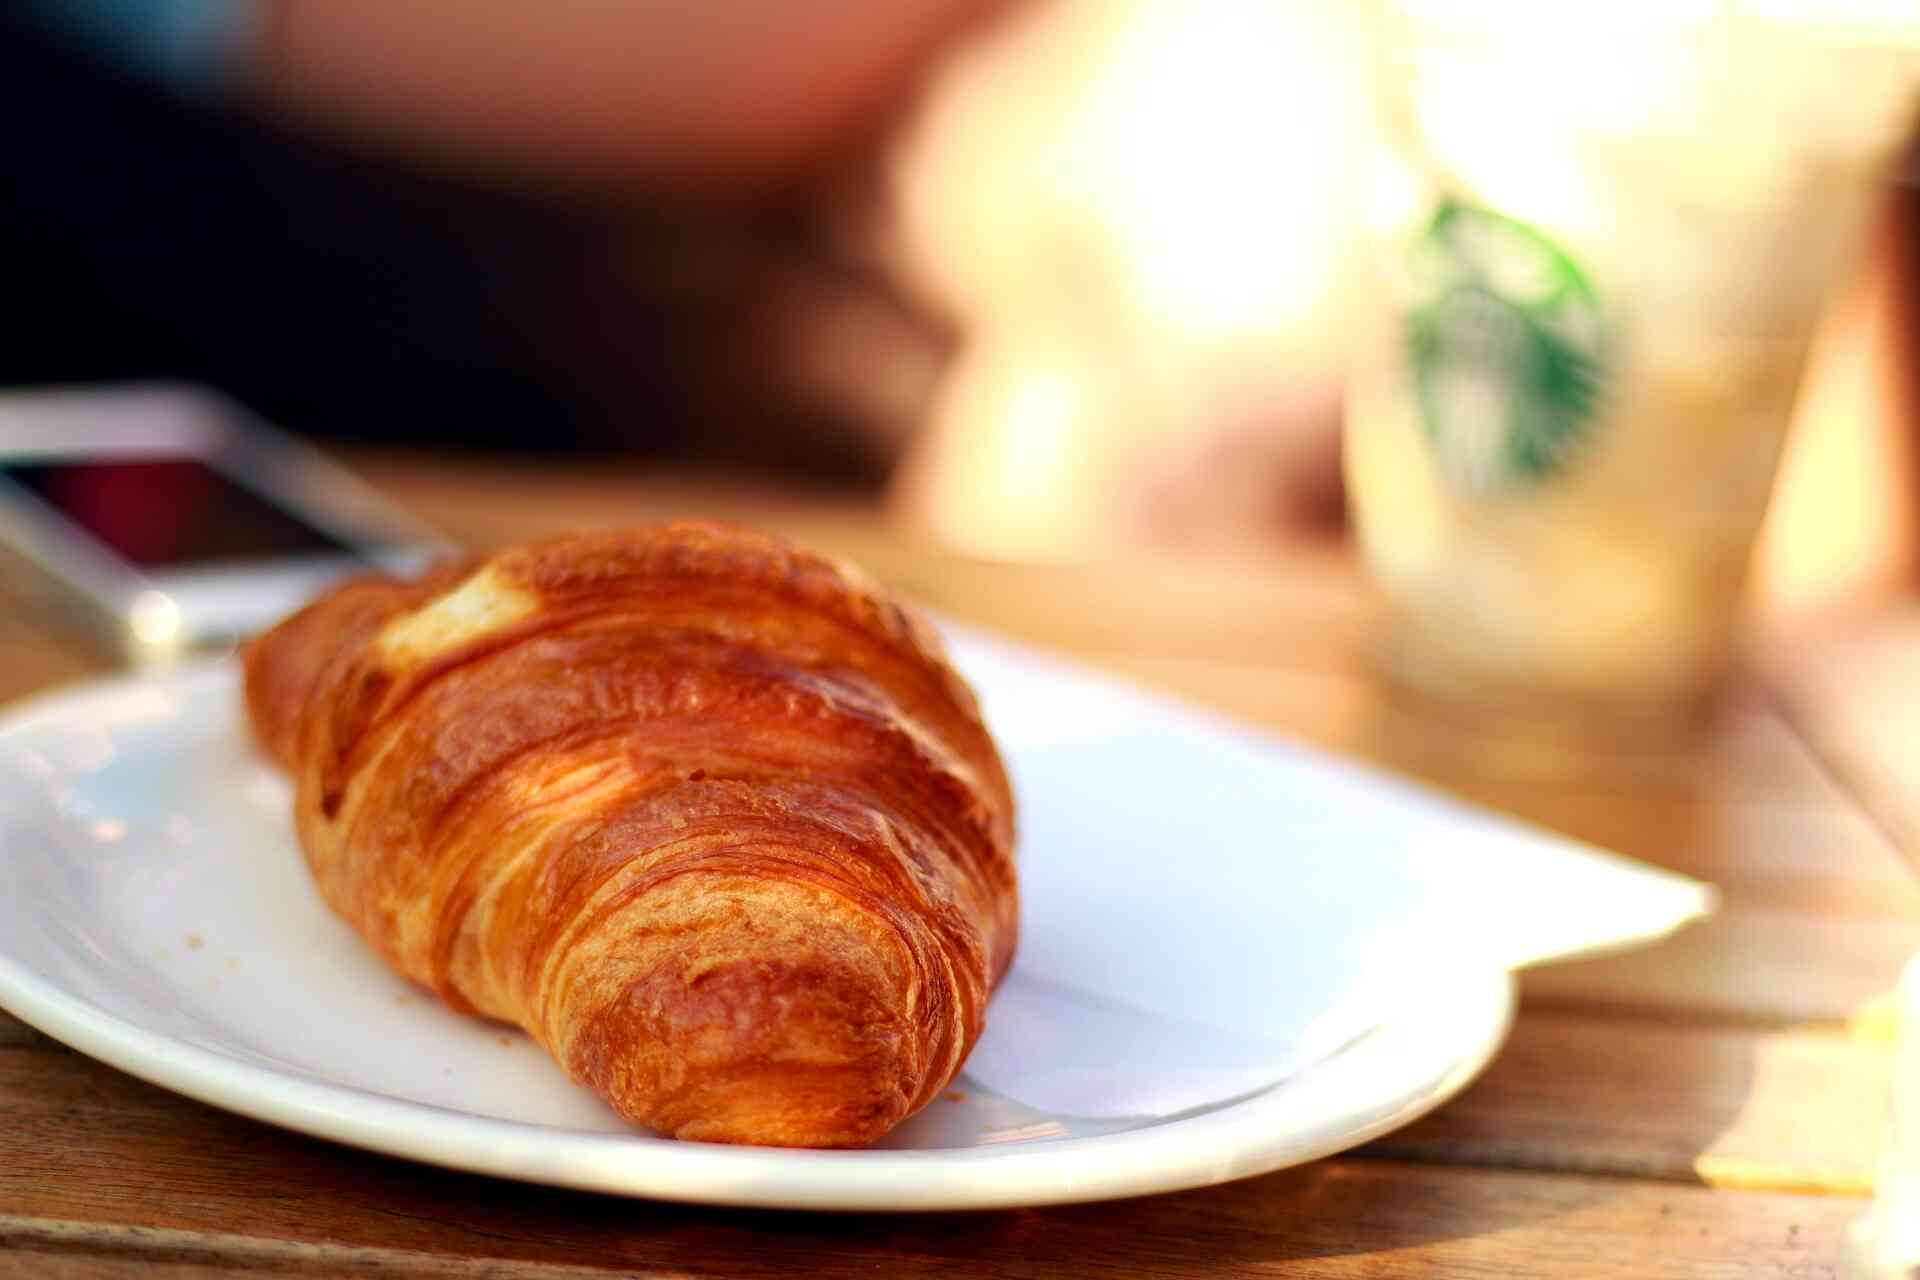 Order more than just a croissant with your language skills